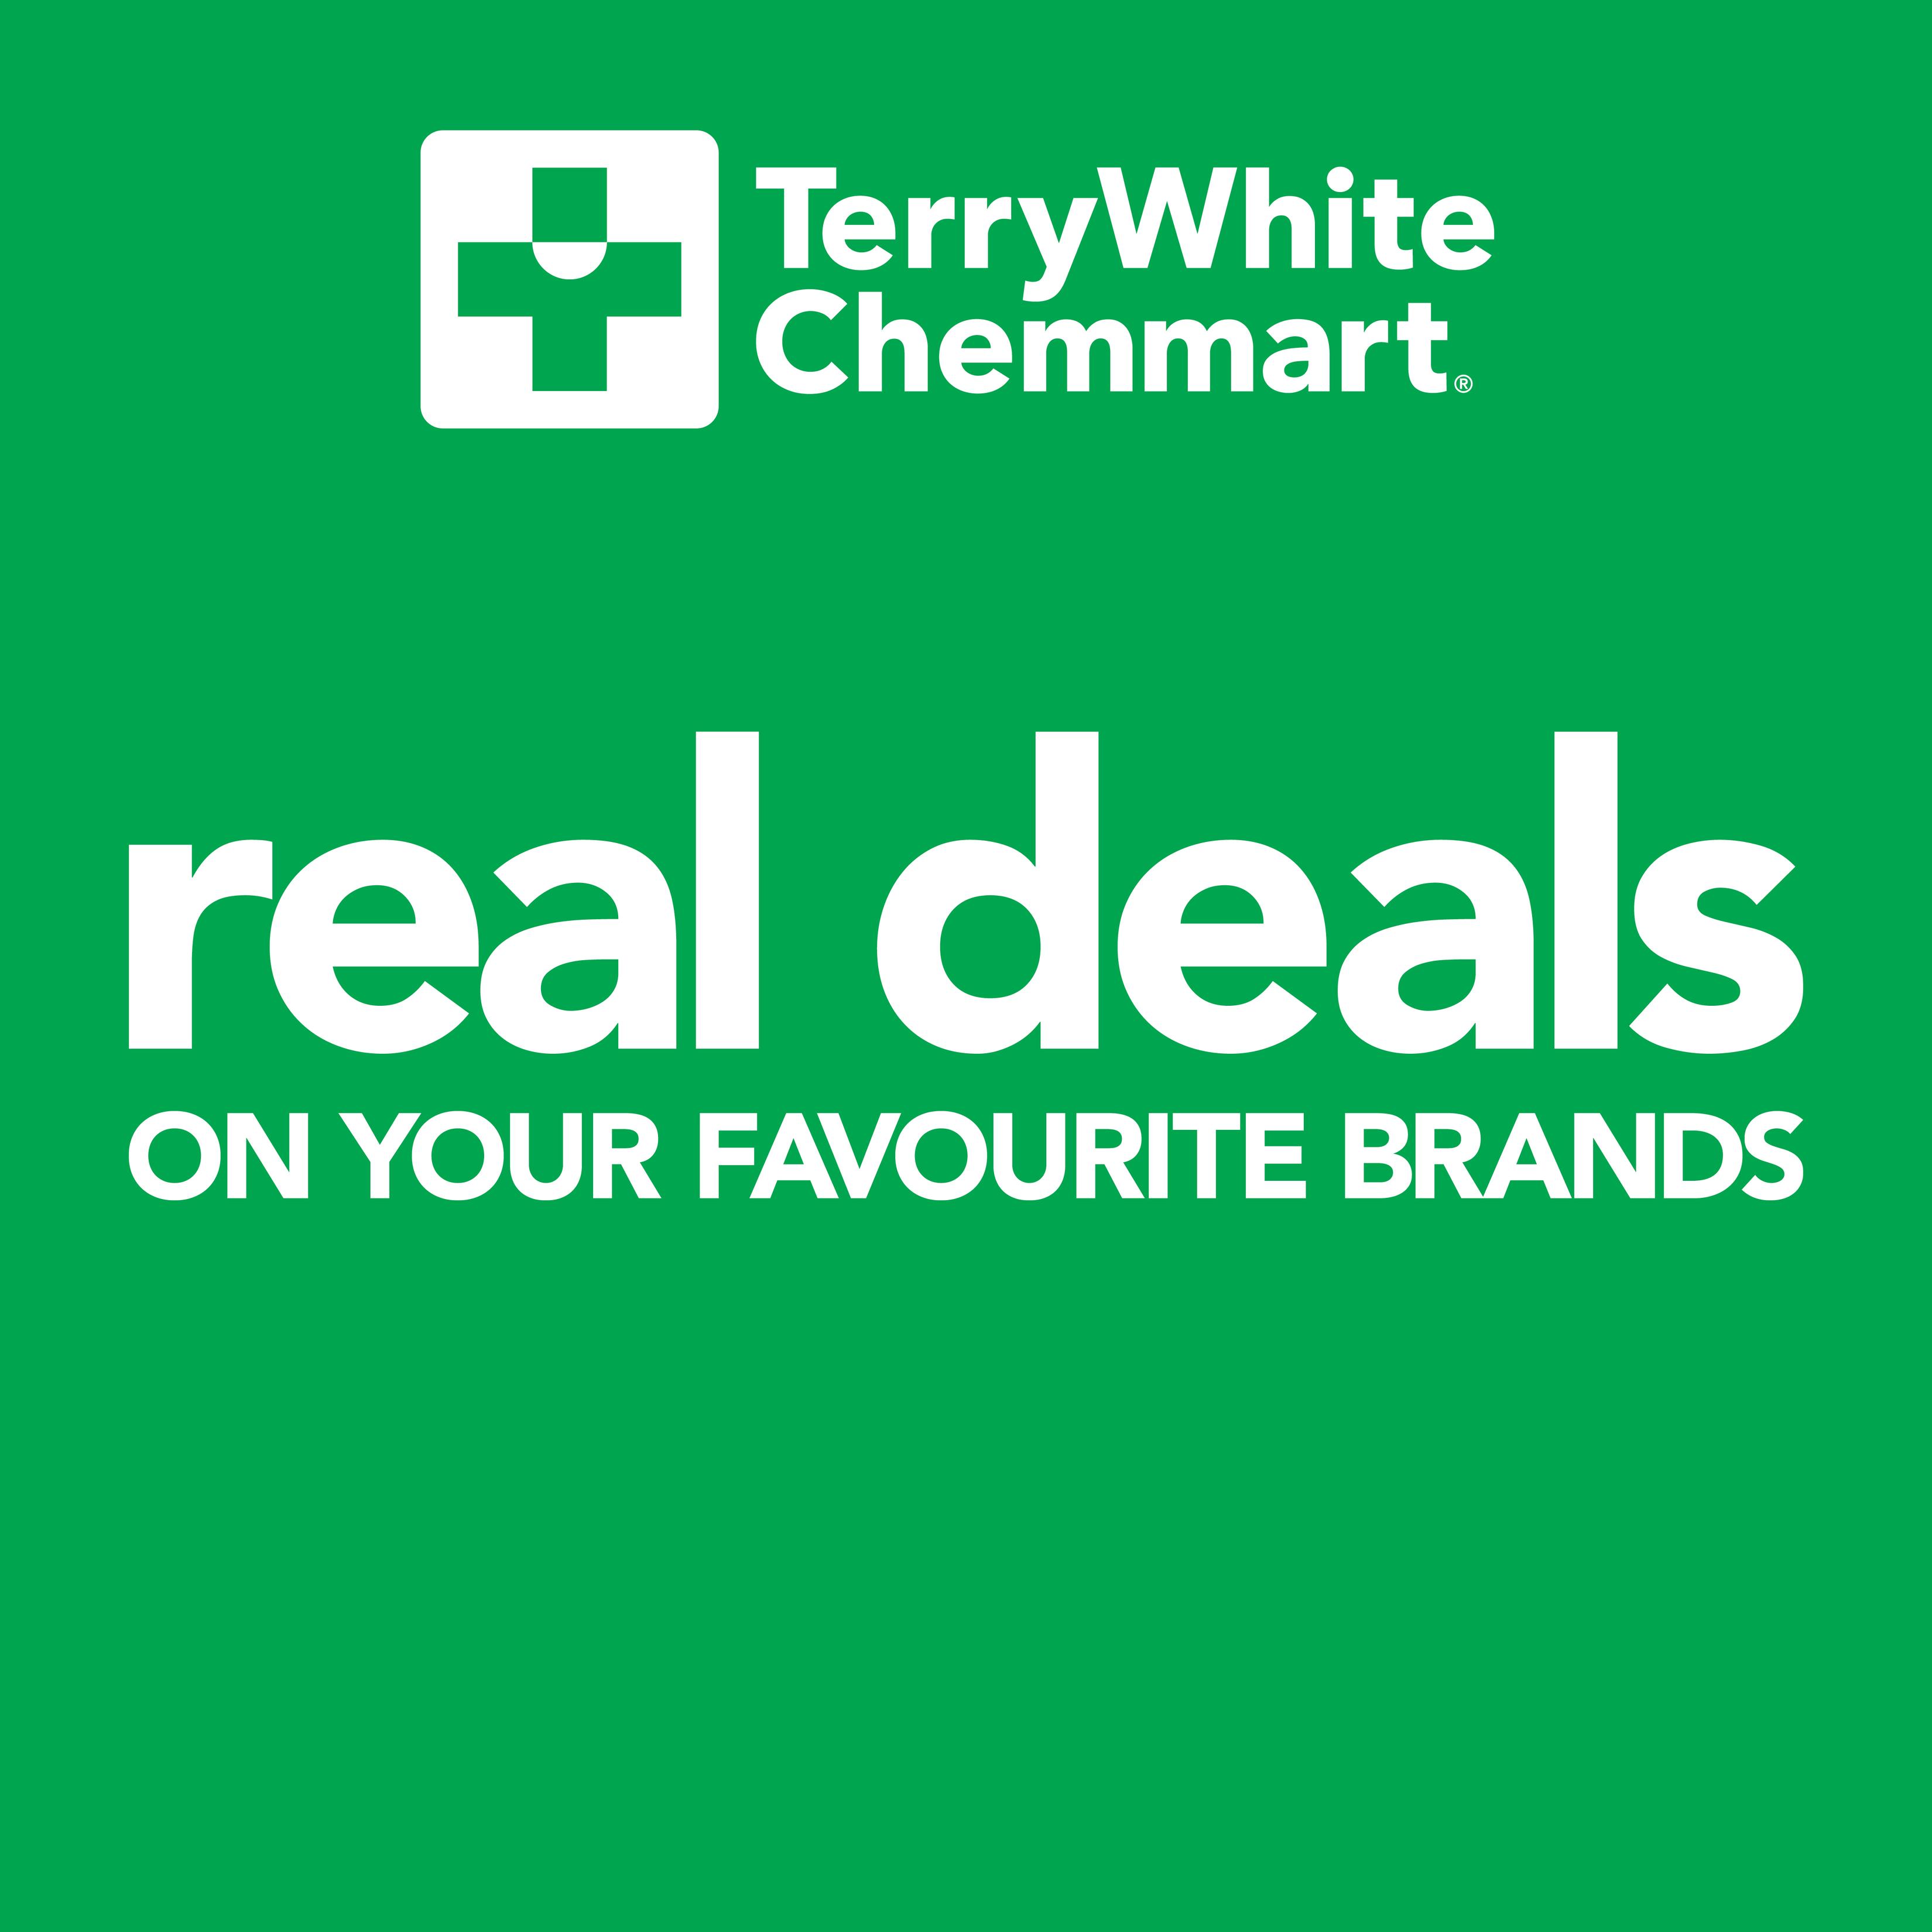 Catalogue Out Now offers in TerryWhite Chemmart